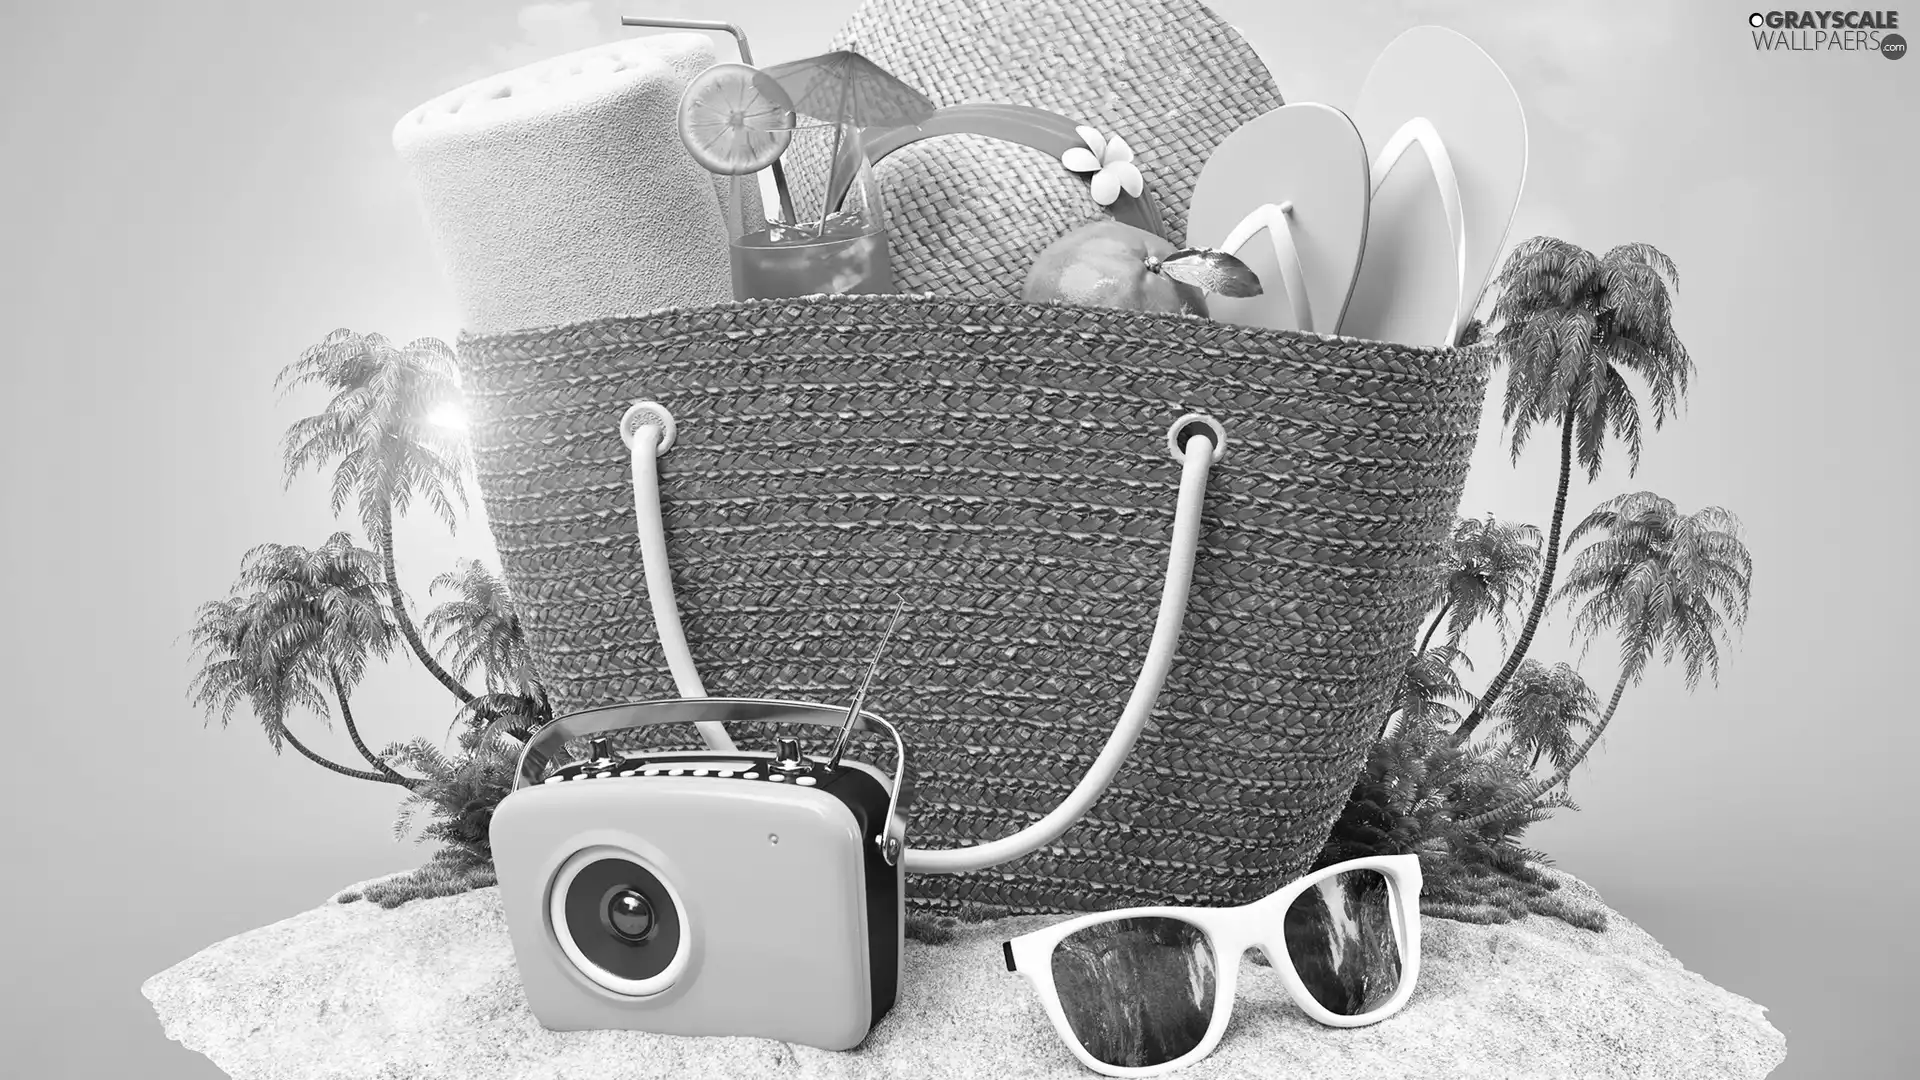 Palms, summer, radio, bag, Flaps, 2D Graphics, Drink, Beaches, holiday, Hat, Glasses